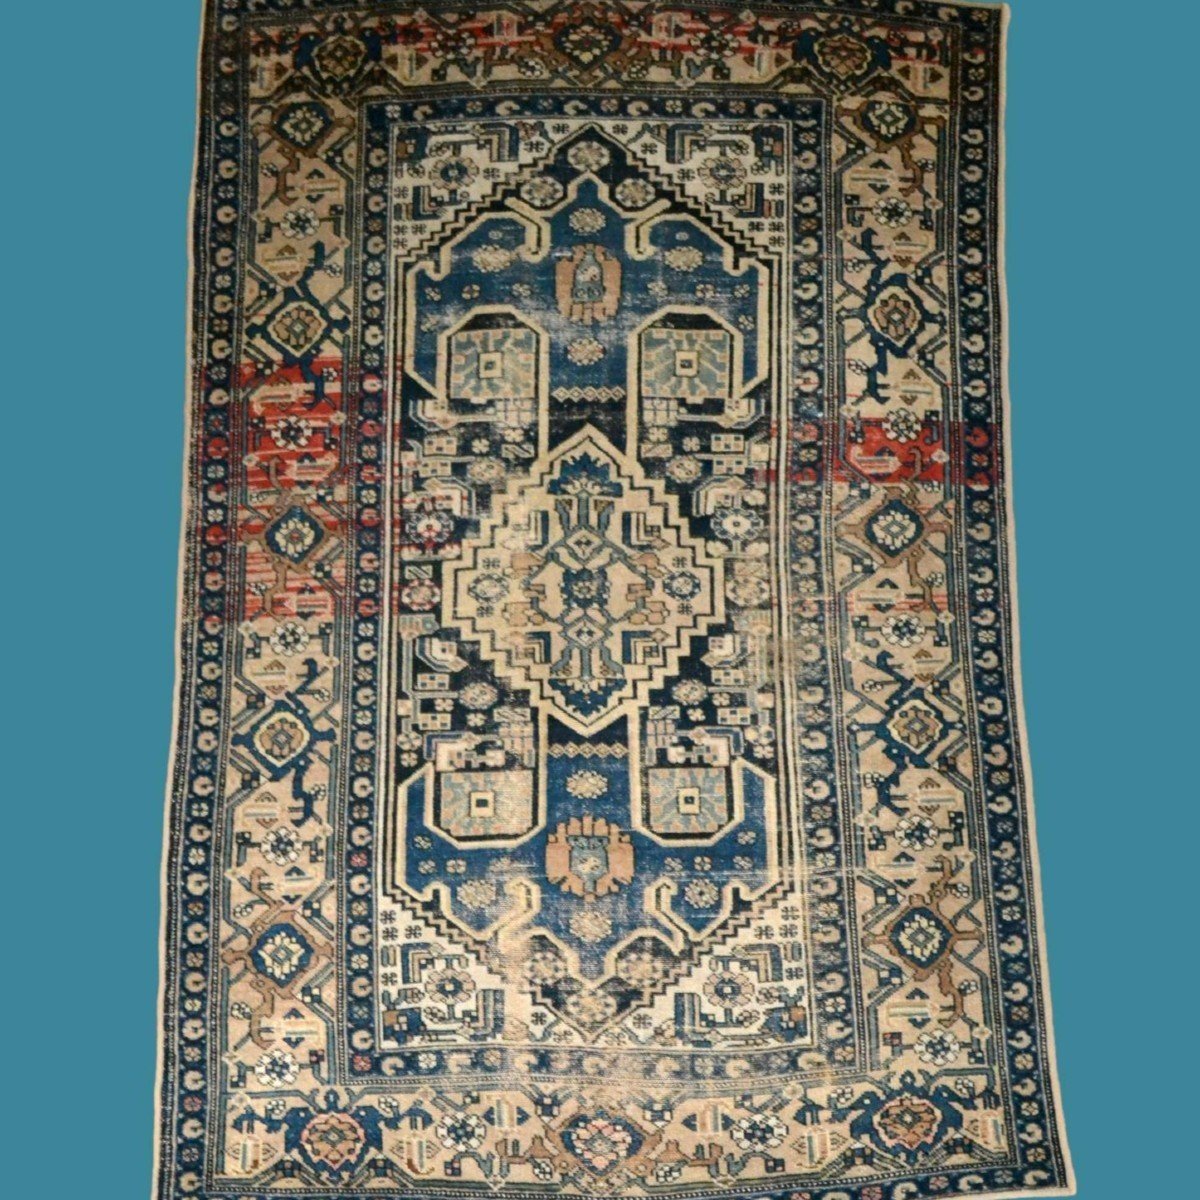 Old Malayer Rug, 137 X 202 Cm, Hand-knotted Wool In Persia, Iran, Early 20th Century-photo-8